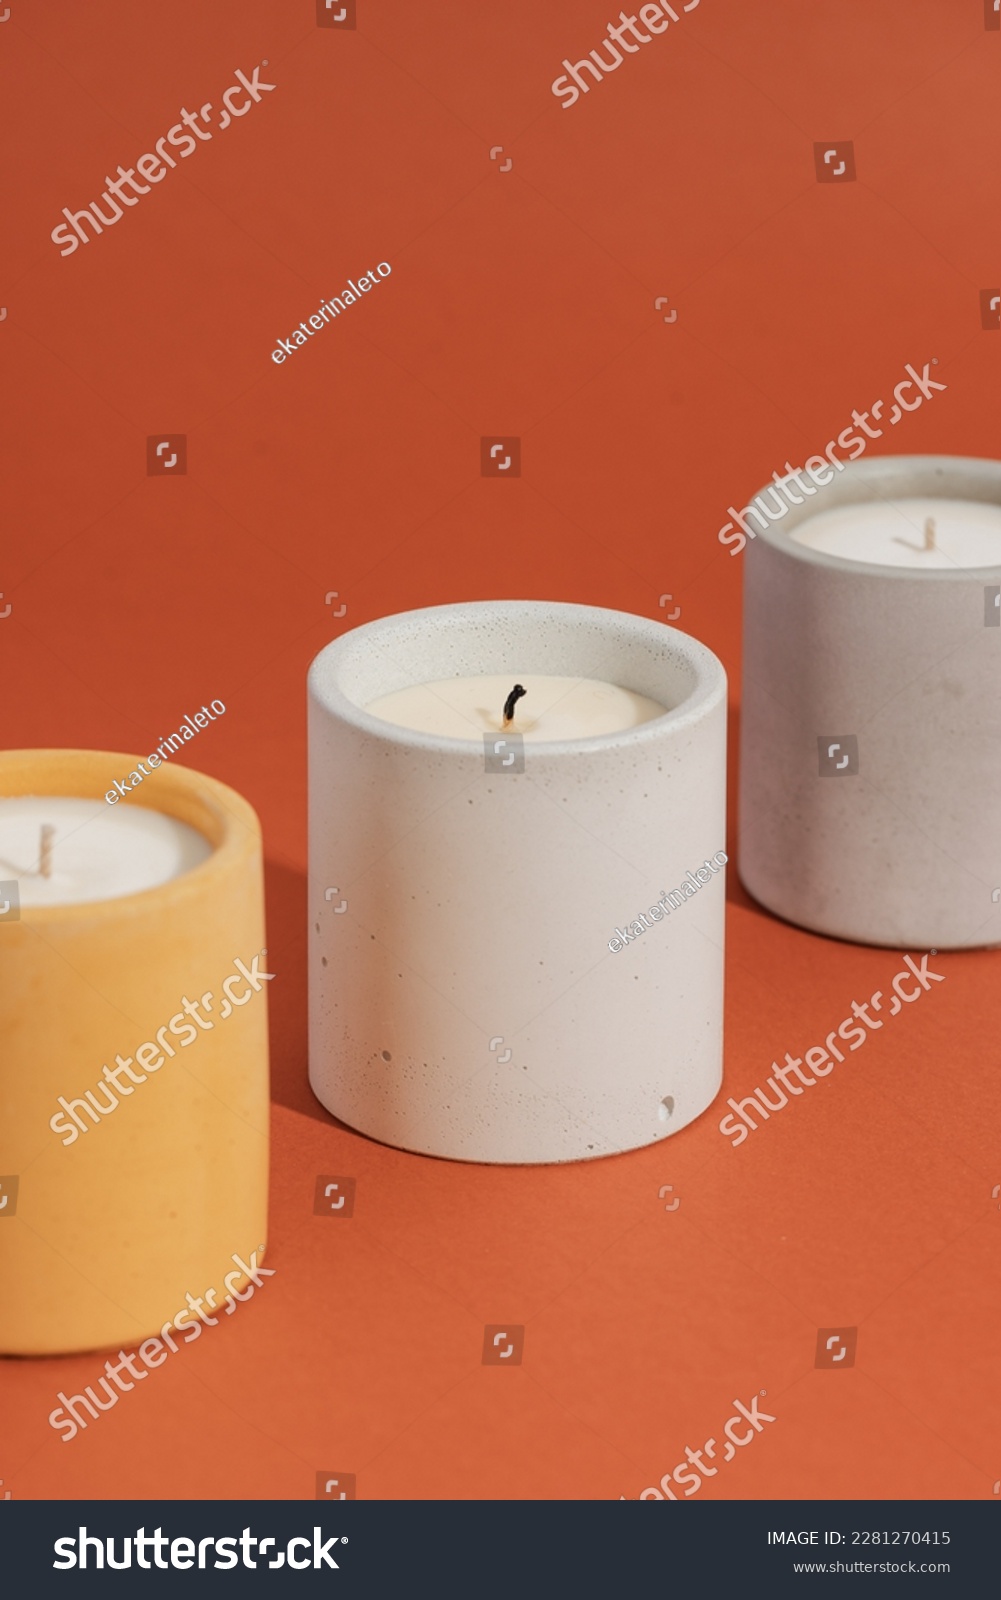 Aromatic premium soy candles in gray concrete jar on orange background. Poster banner for candle shop, beauty, spa #2281270415